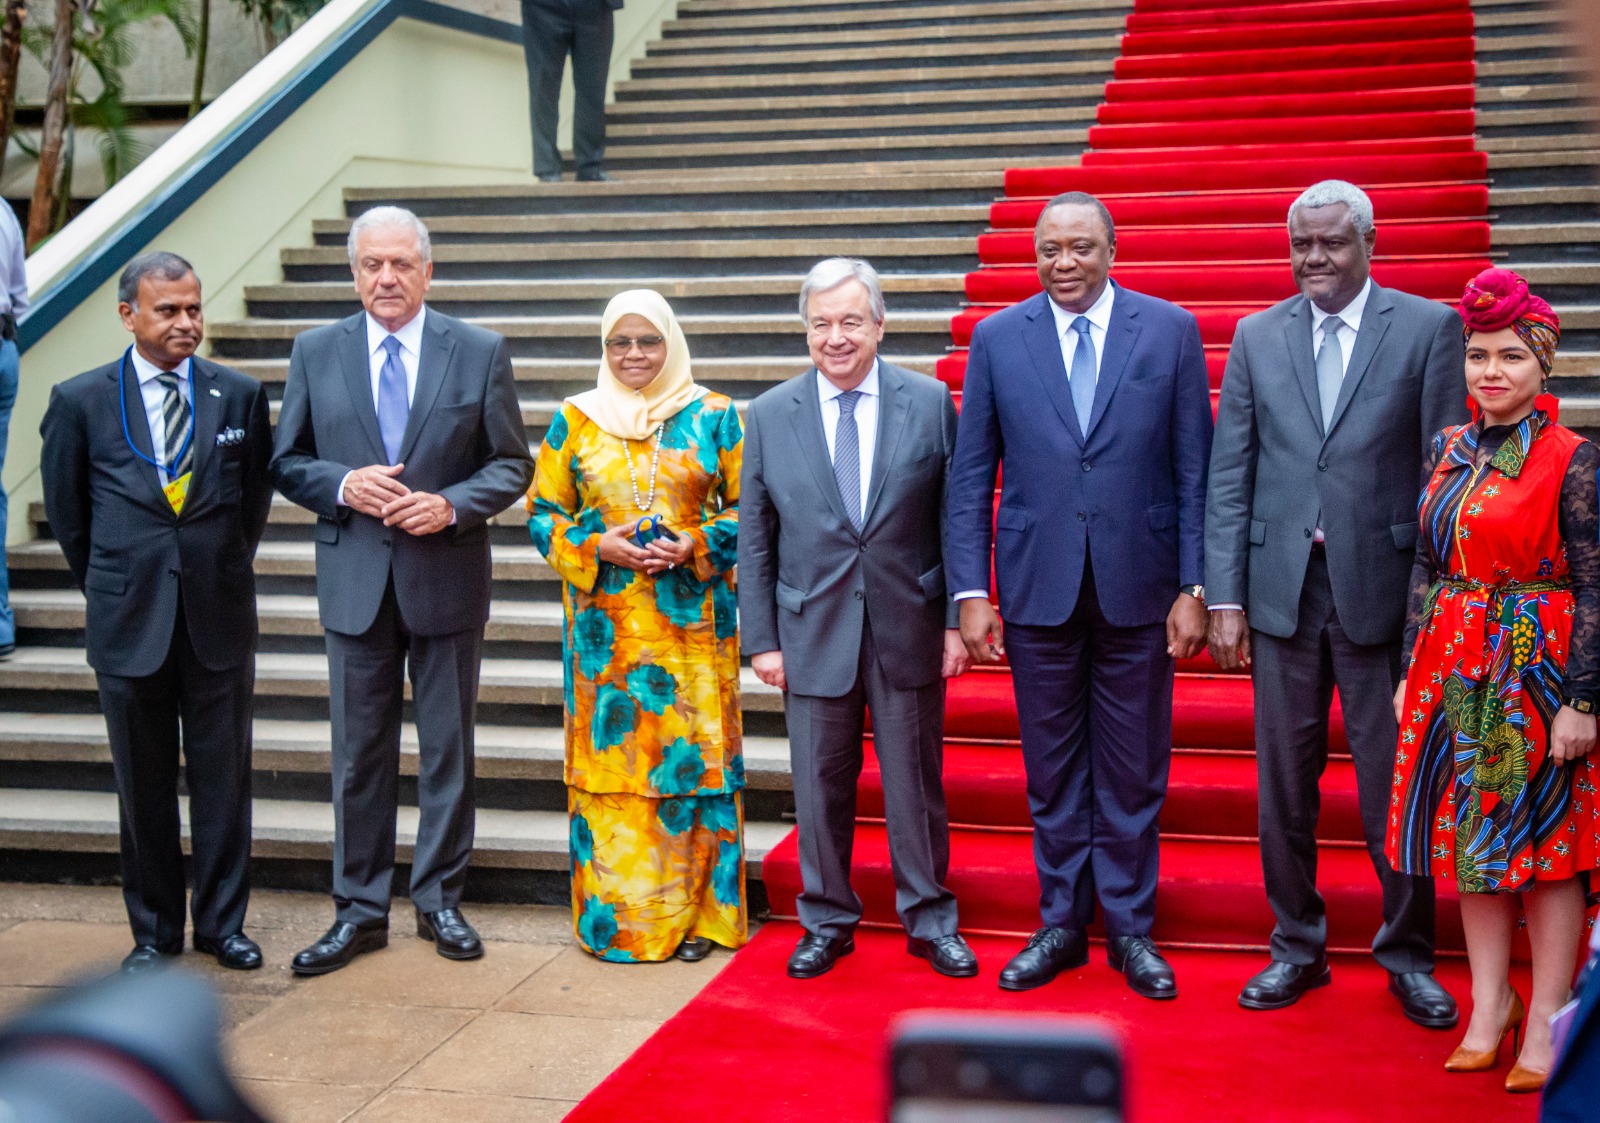 UN-Habitat Executive Director, UN Secretary-General, President of Kenya, African Union Chairperson at the High-Level Conference on Counter Terrorism, Nairobi, Kenya